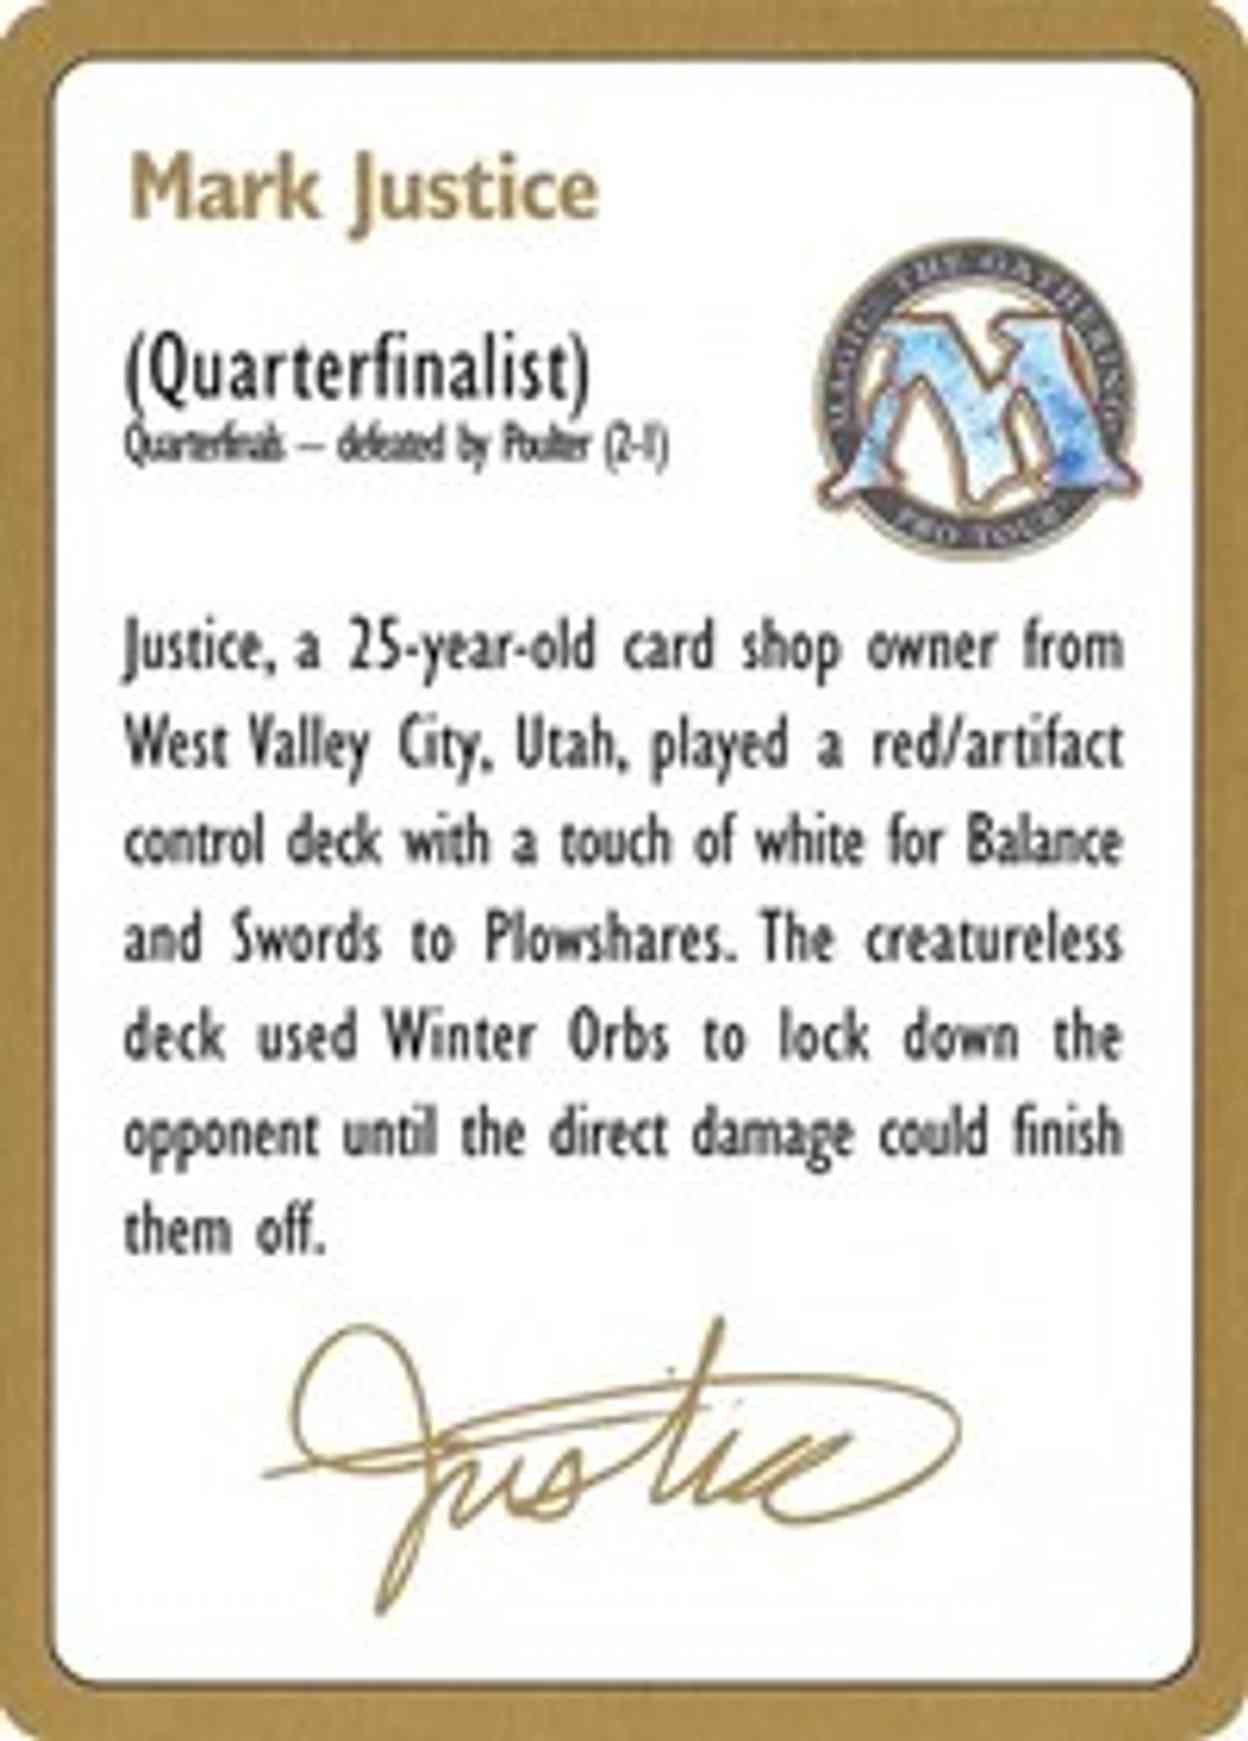 1996 Mark Justice Biography Card magic card front